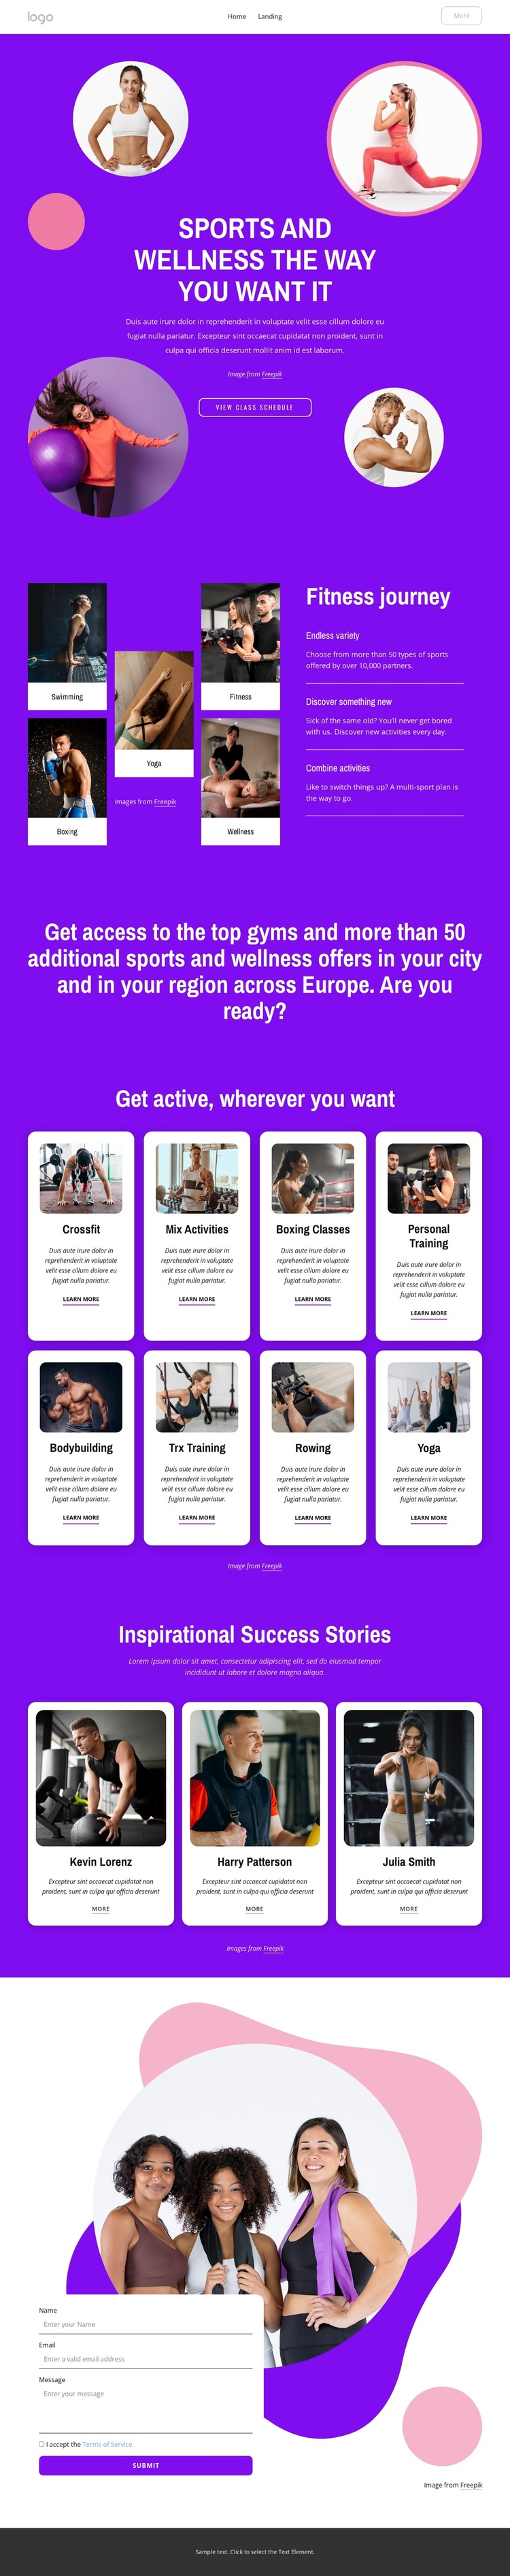 Sports and wellness the way you want it Joomla Template